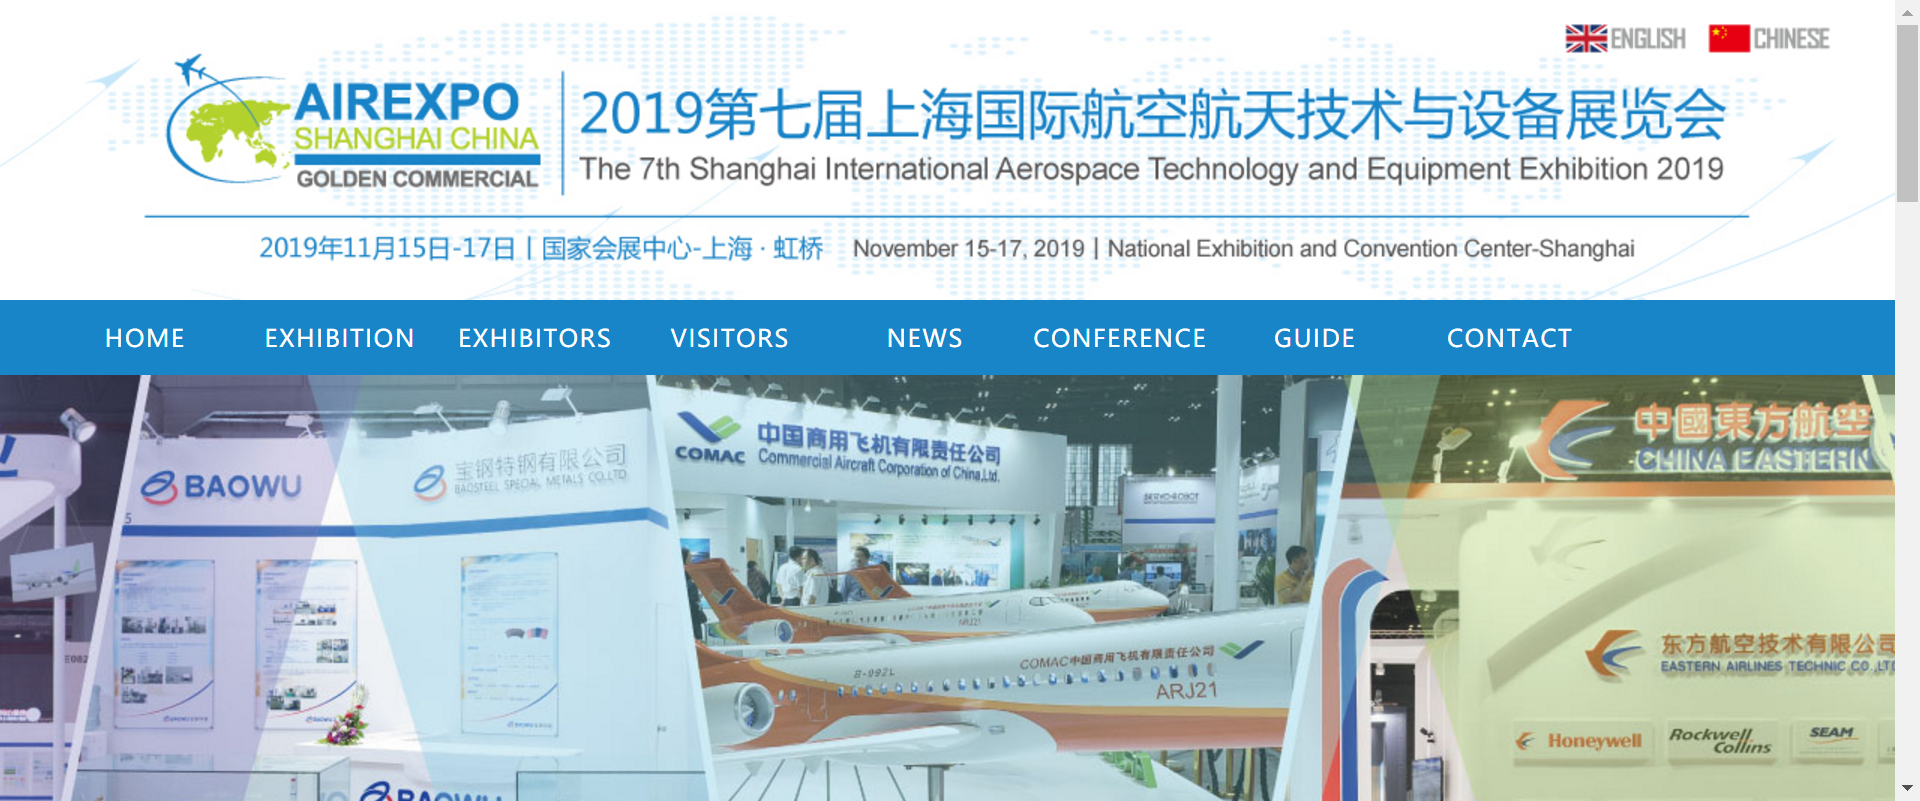 The 7th Shanghai International Aerospace Technology and Equipment Exhibition 2019